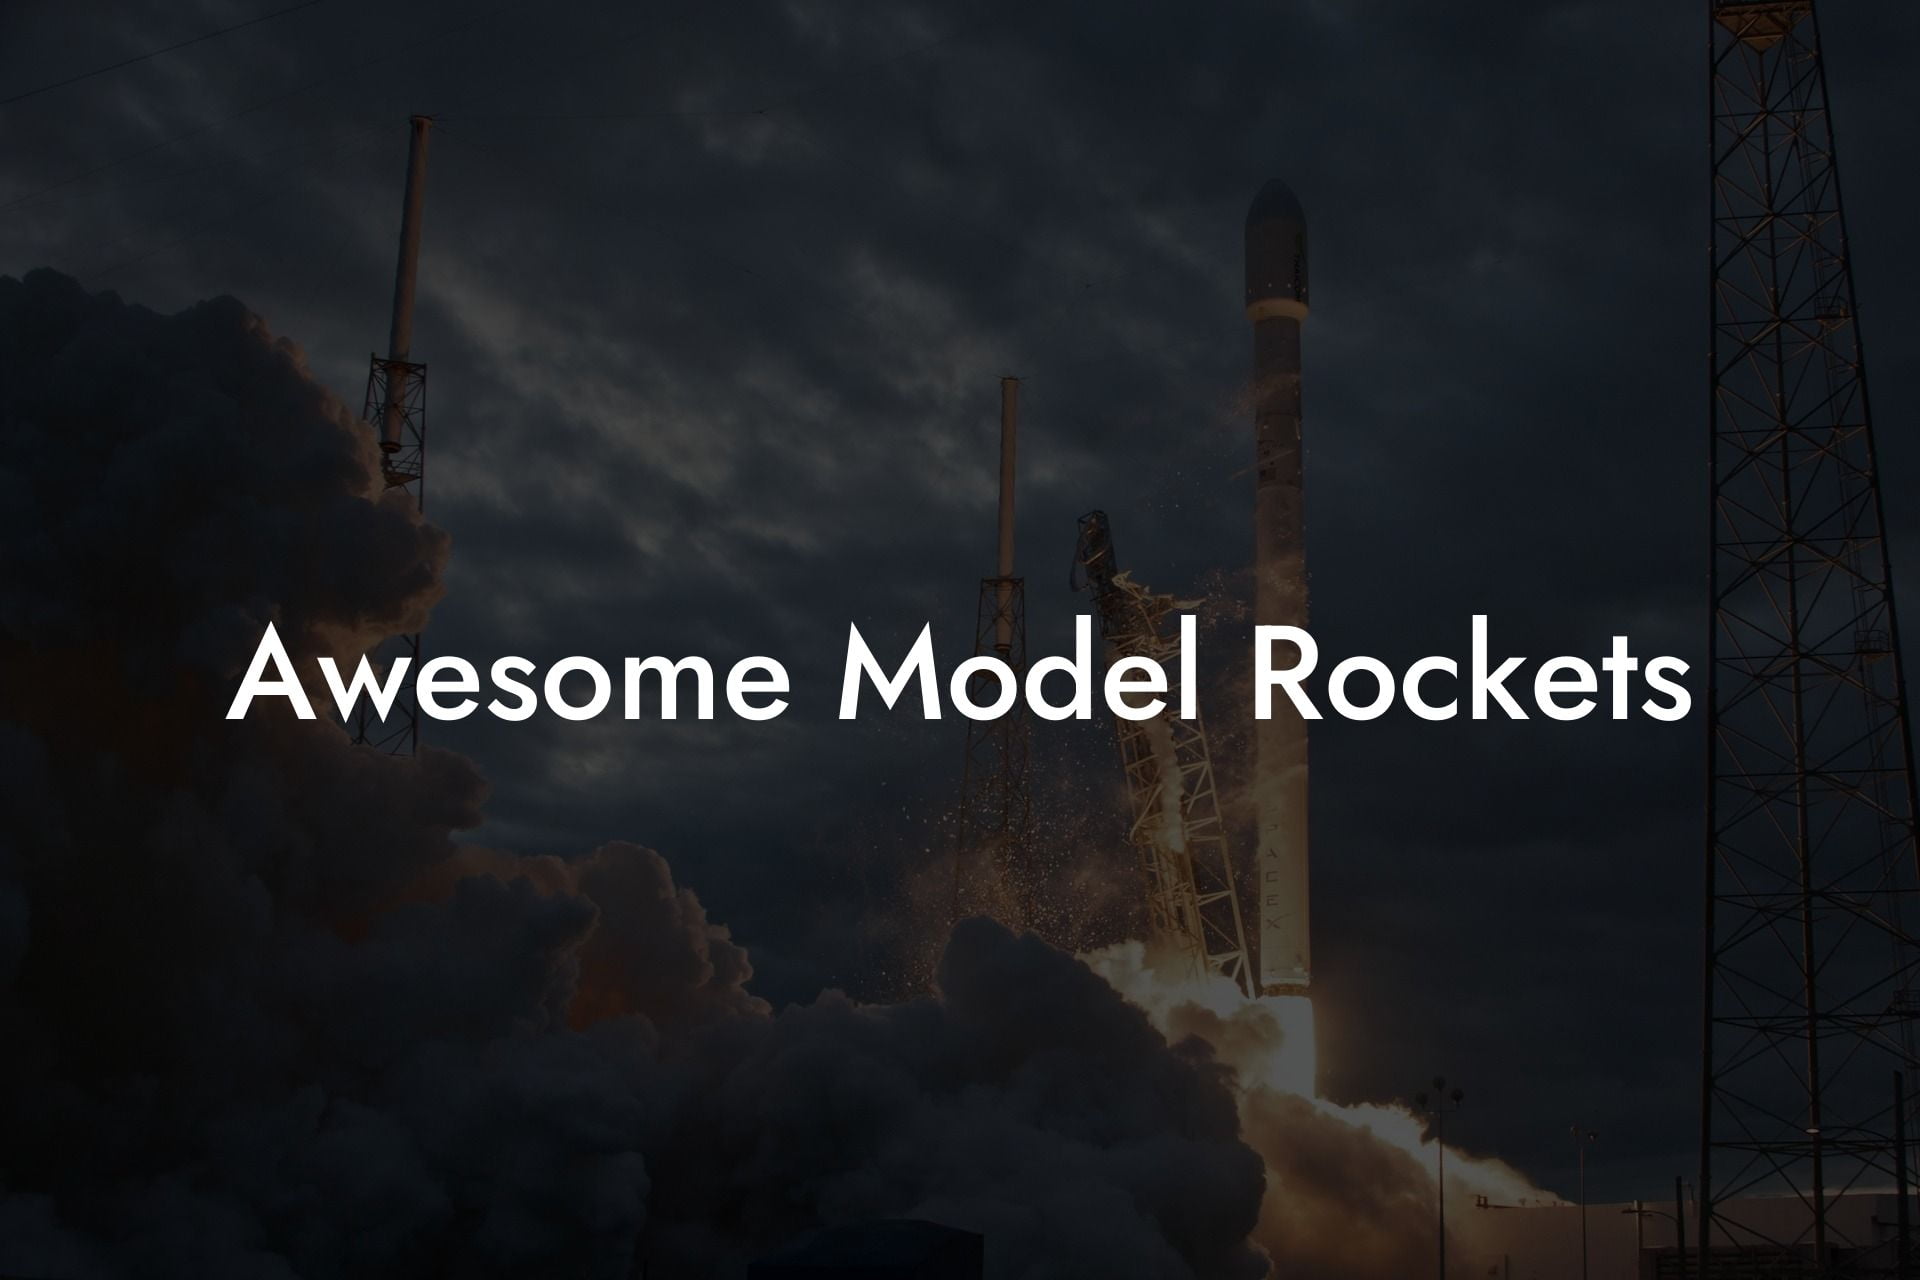 Awesome Model Rockets